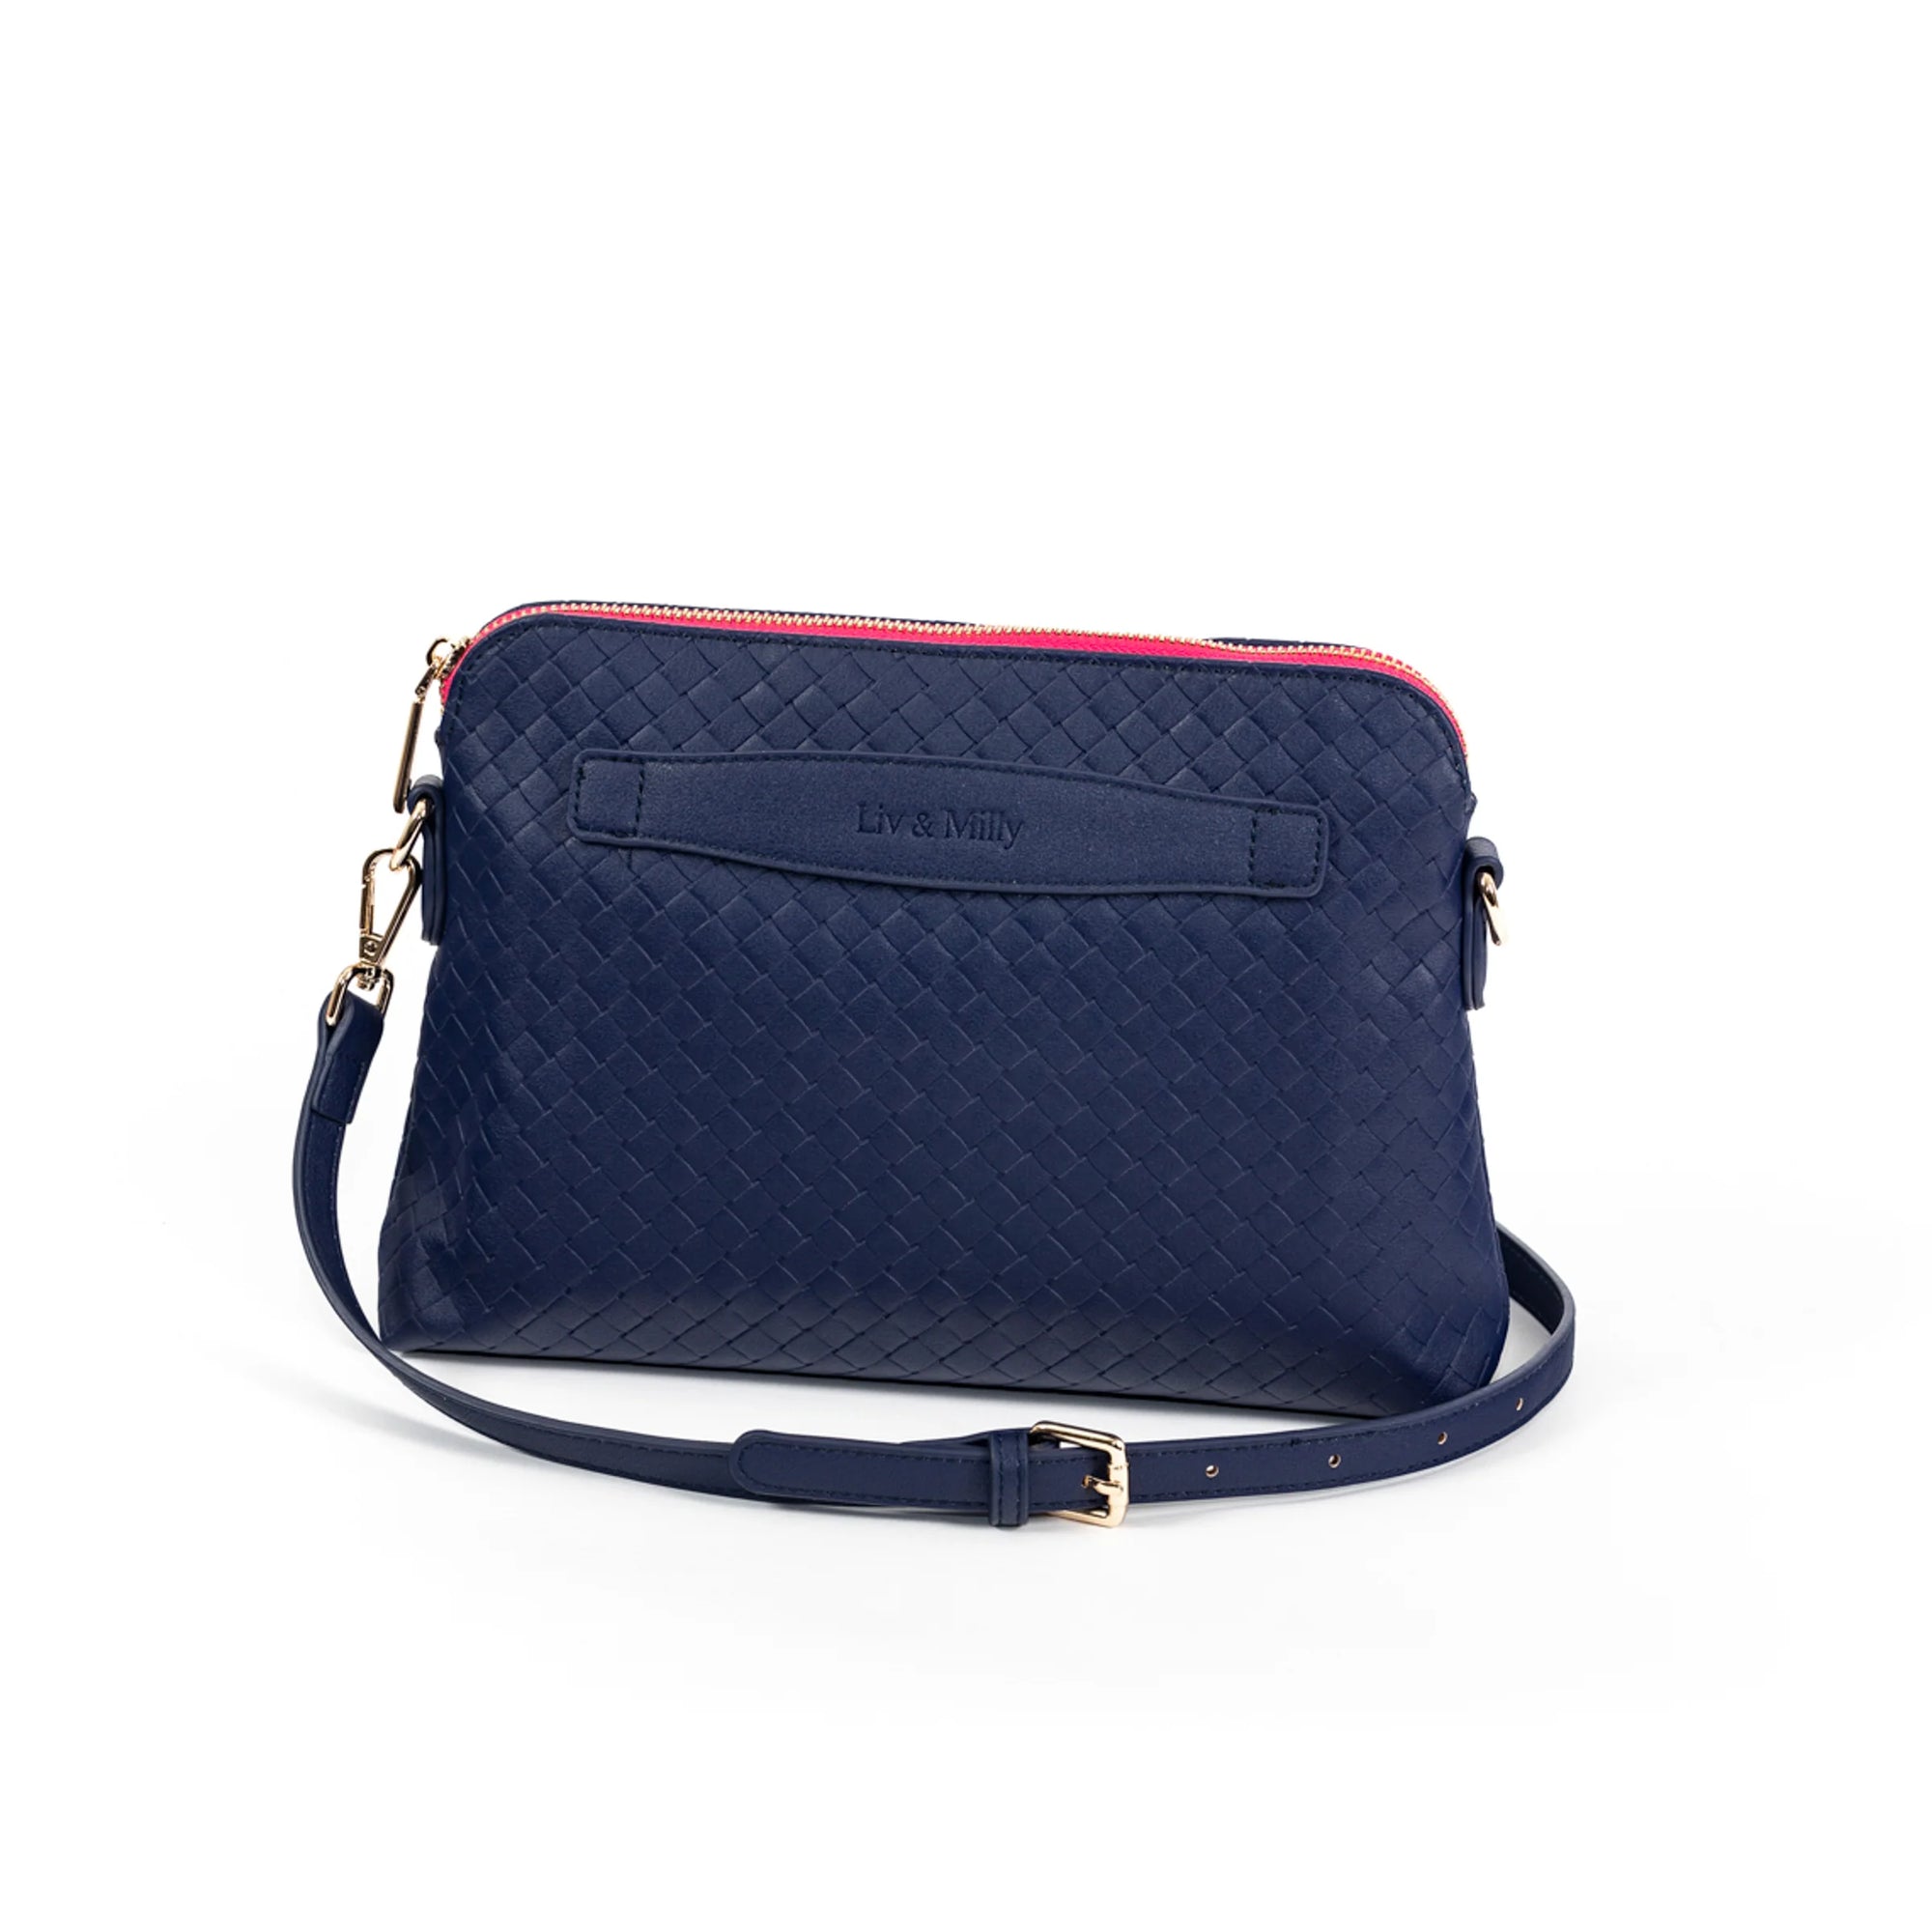 Mill & Hide - Liv & Milly - Lucille Crossbody Bag - Navy